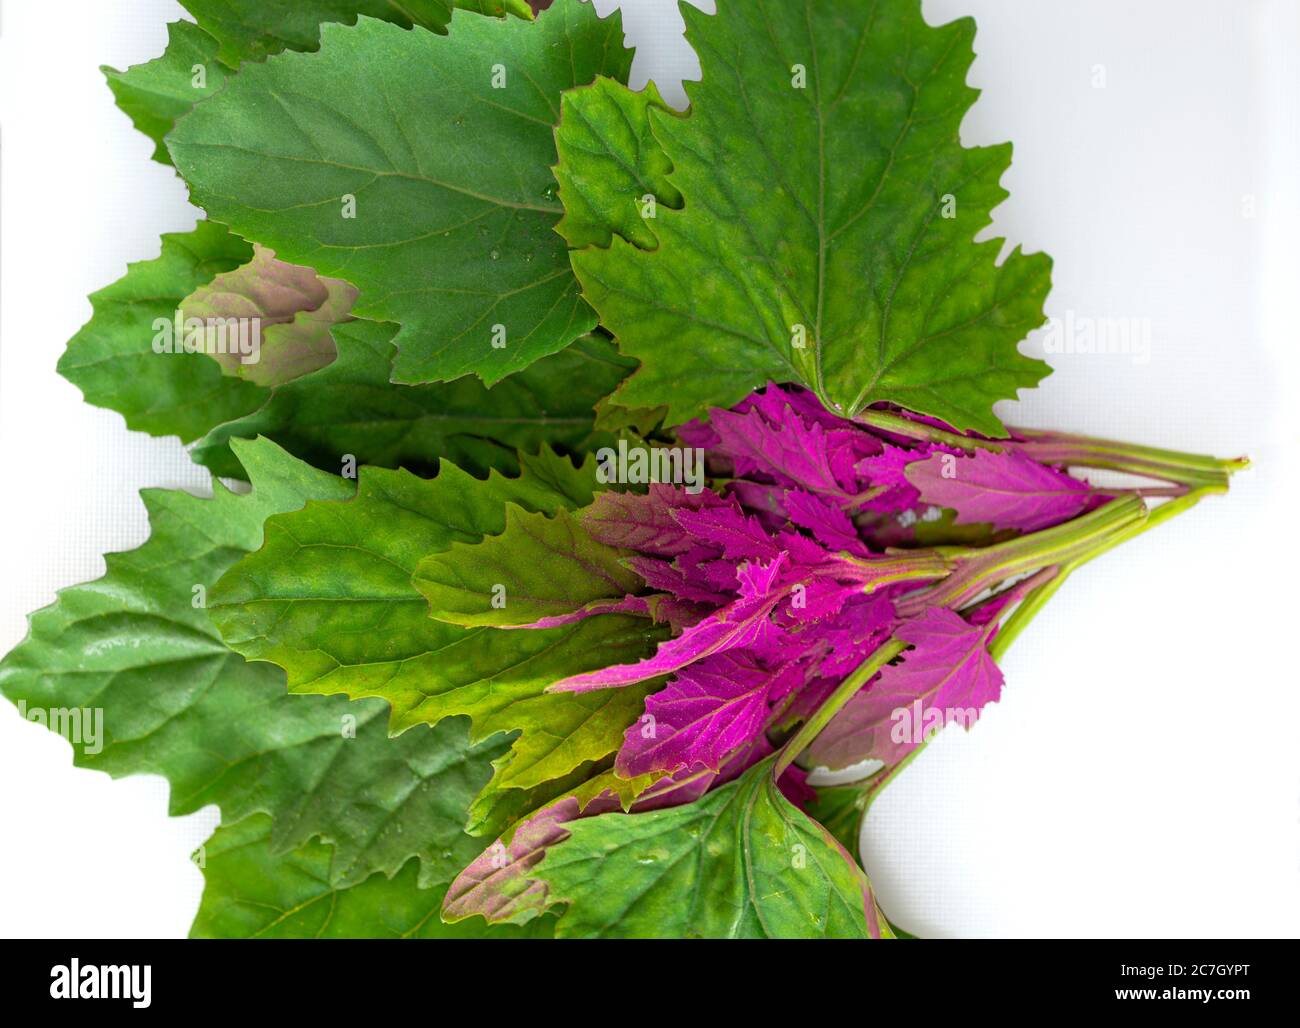 Tree spinach leaves being prepared ready to cook in the kitchen. Stock Photo